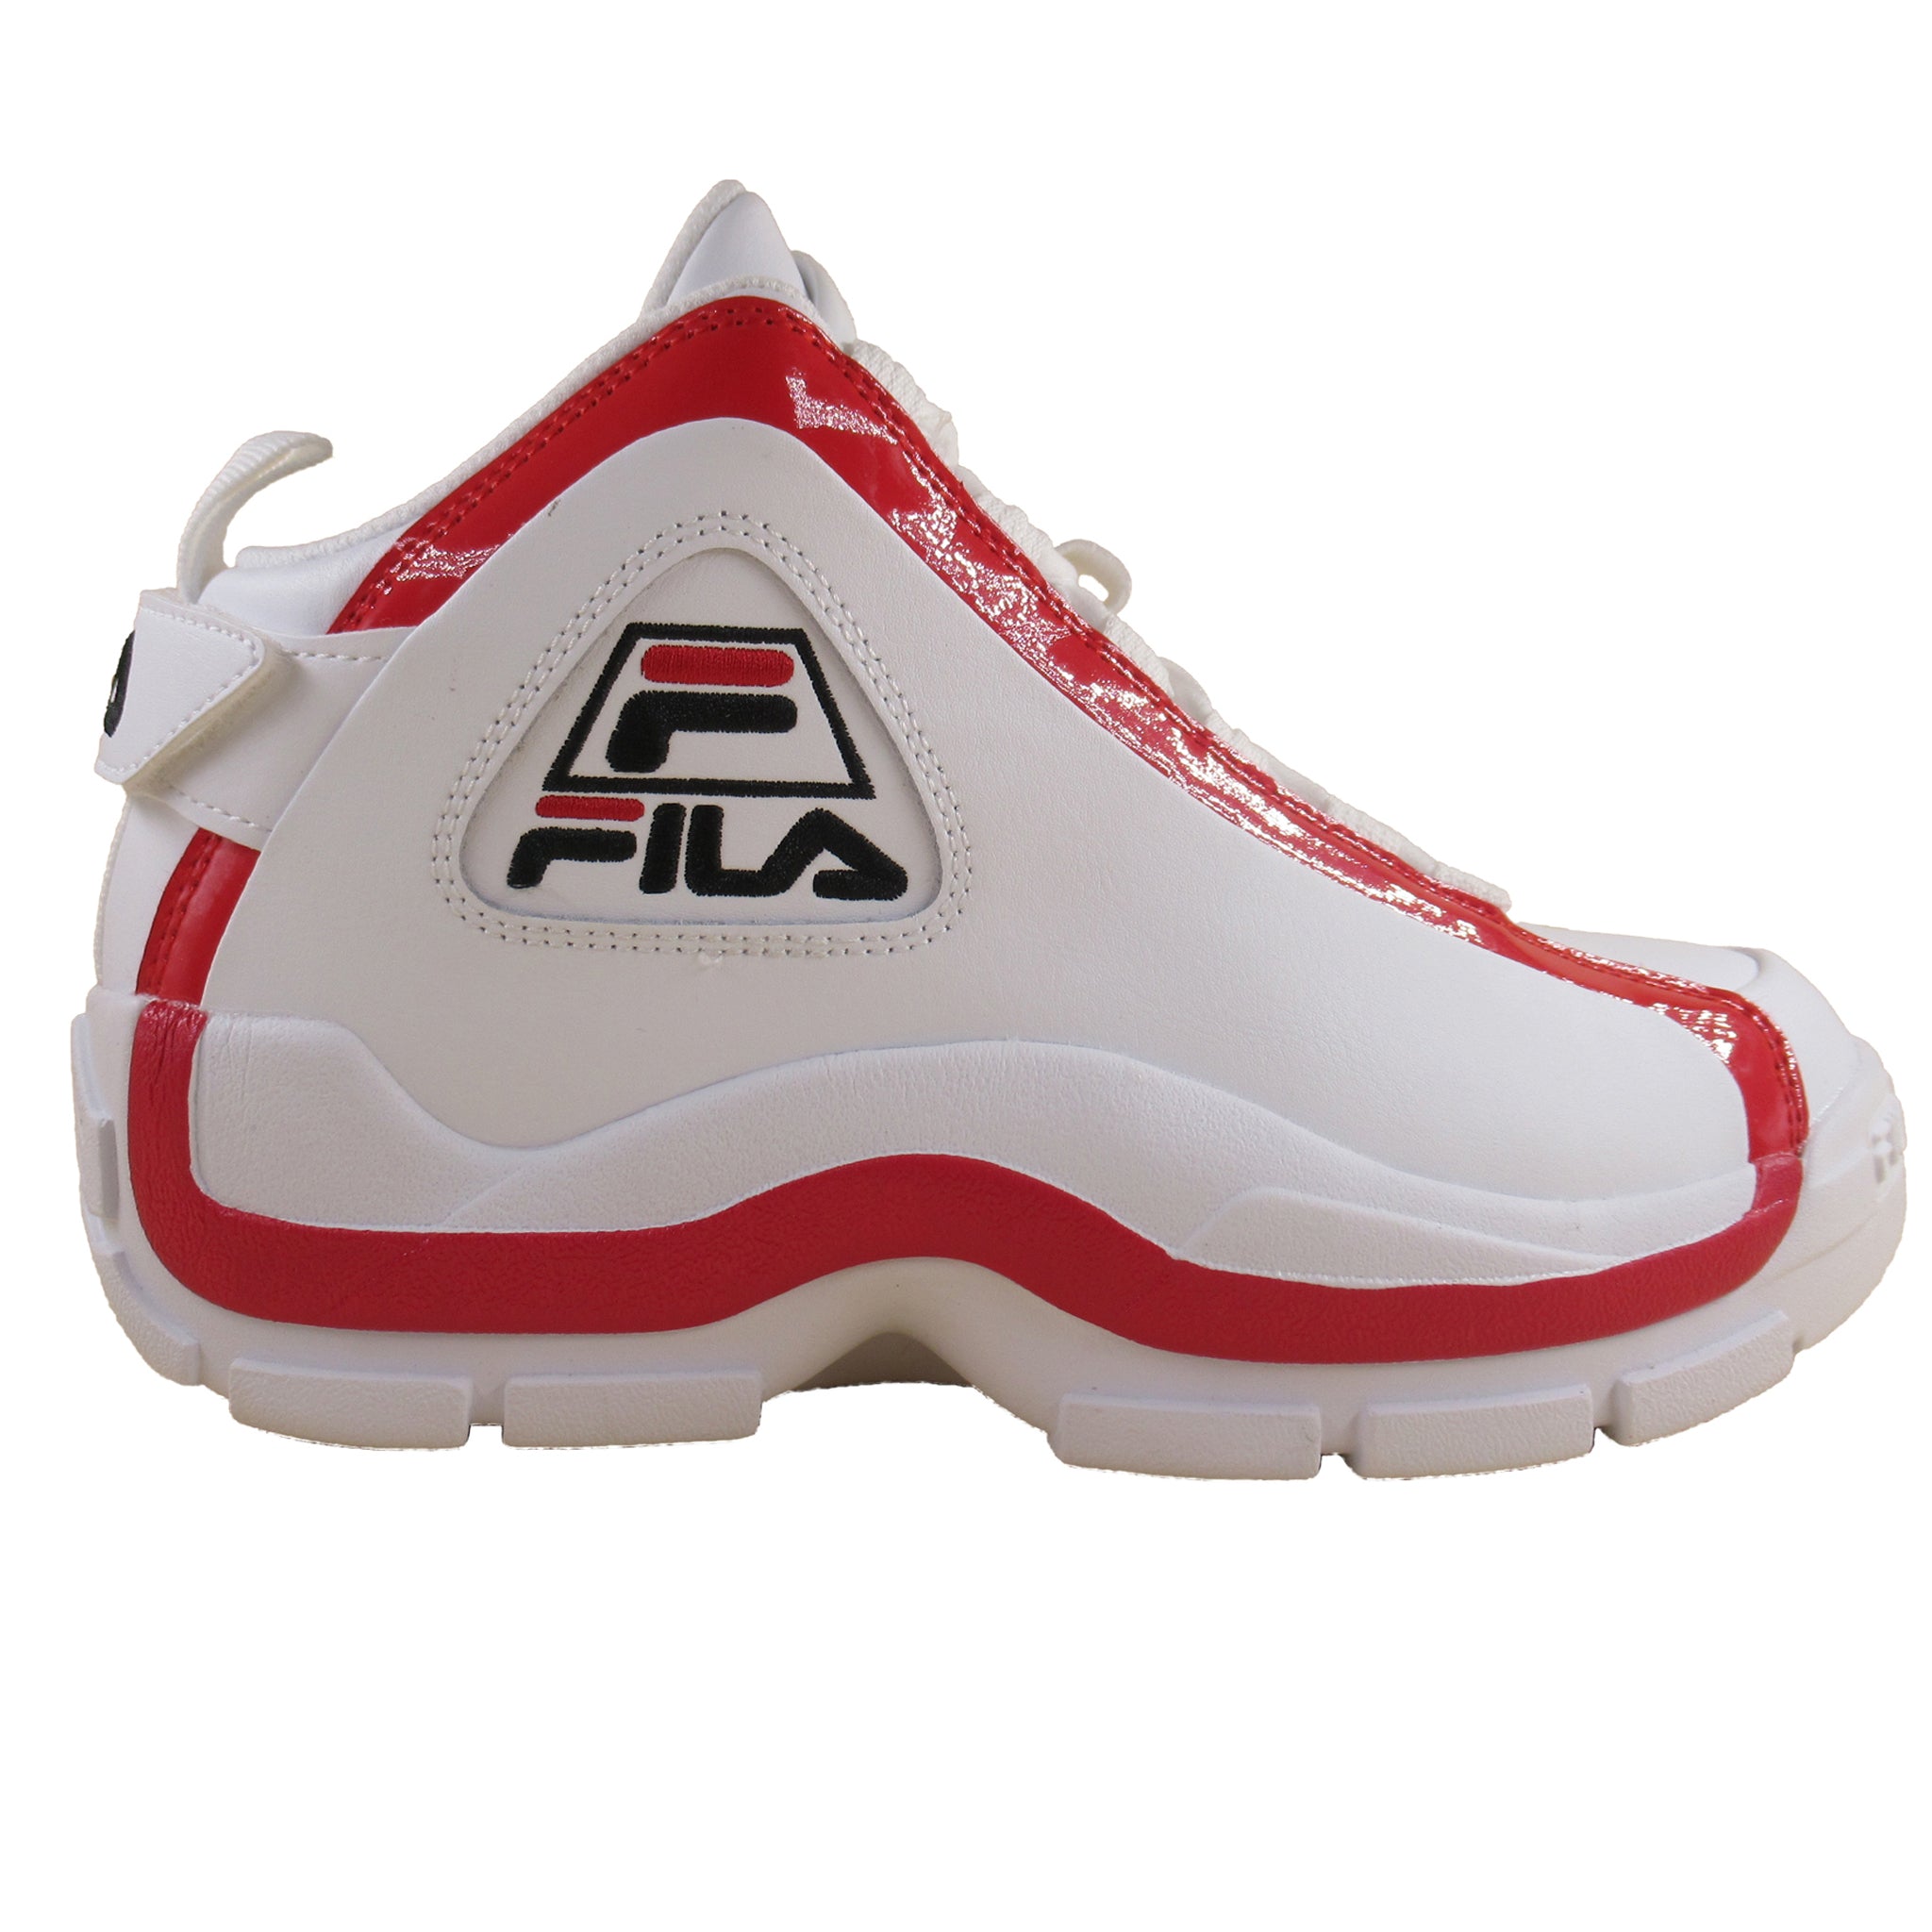 grant hill tennis shoes